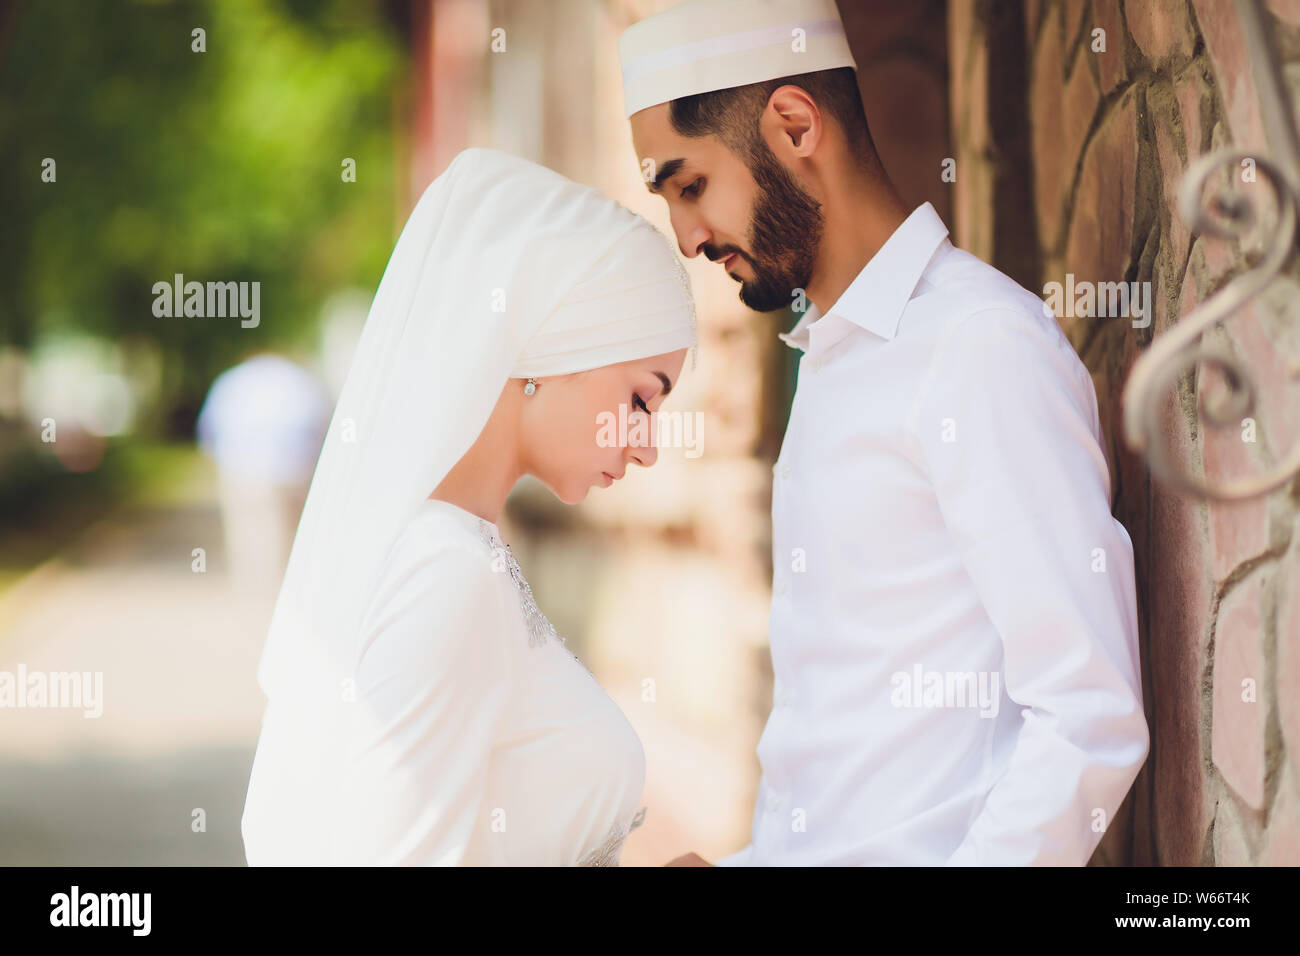 After islam romance marriage in Is love